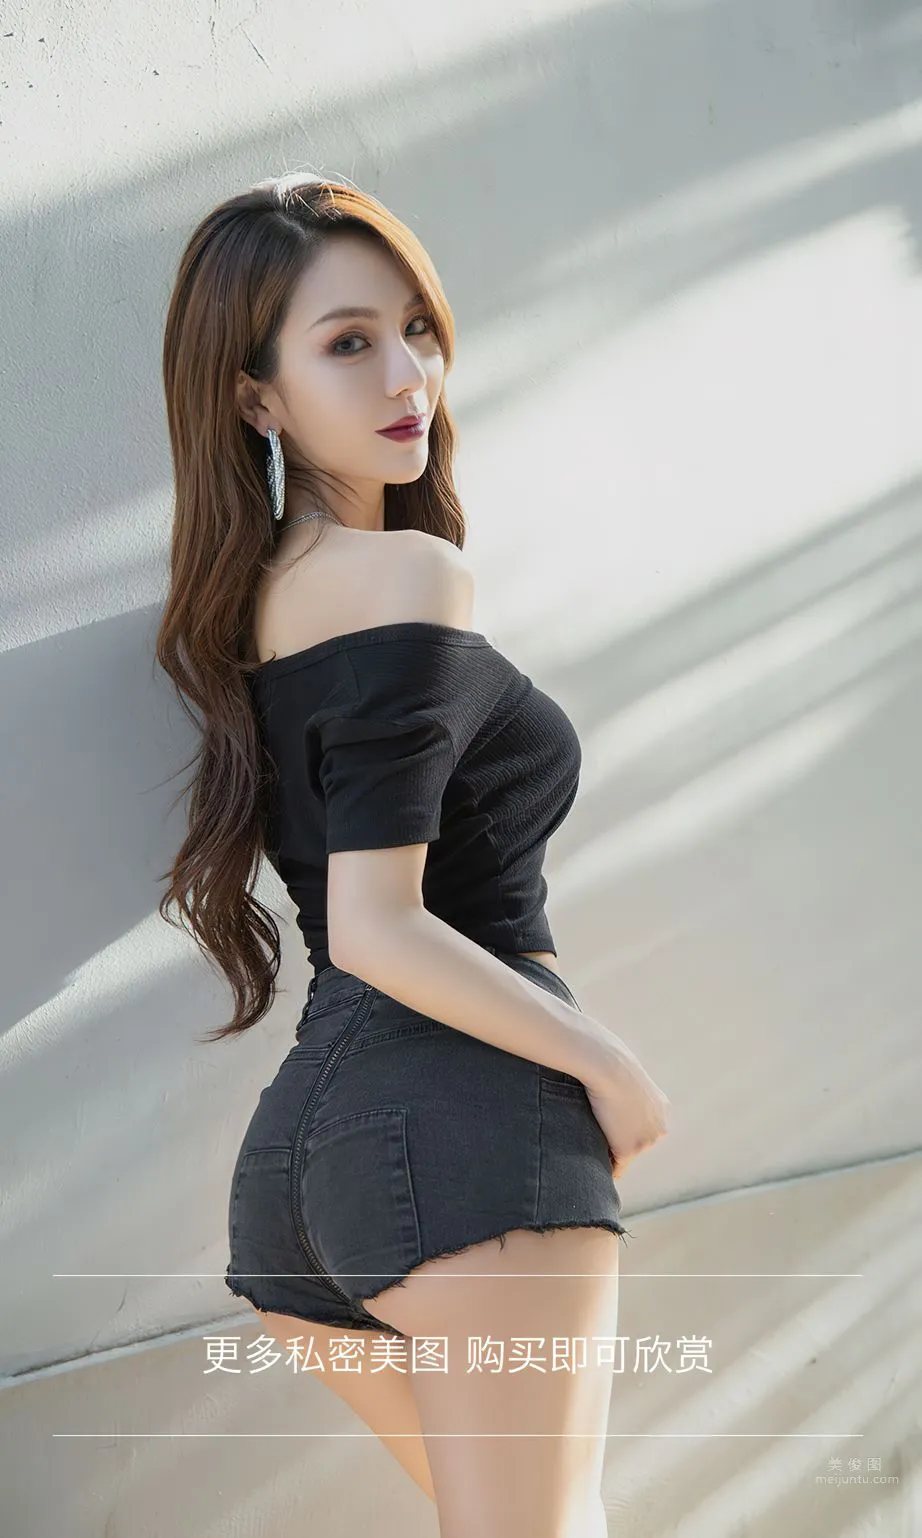 Juicy xiaoxiao 不期而遇_12